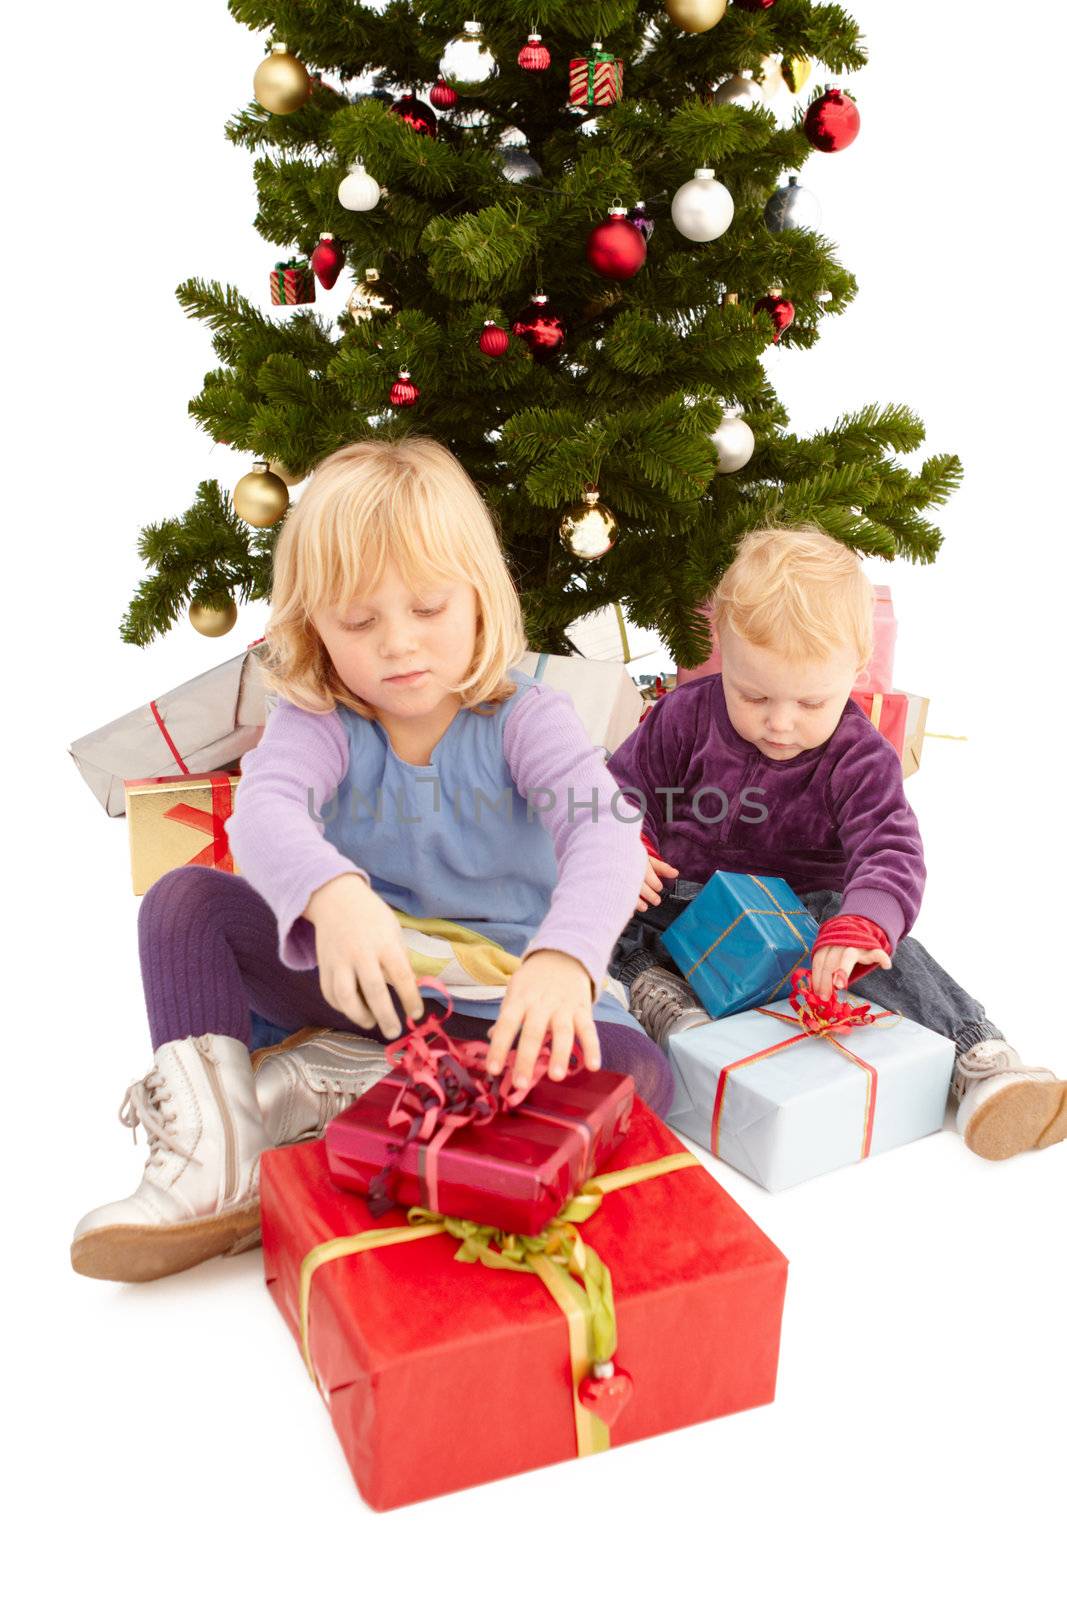 Christmas - Cute young girls opening their presents by FreedomImage